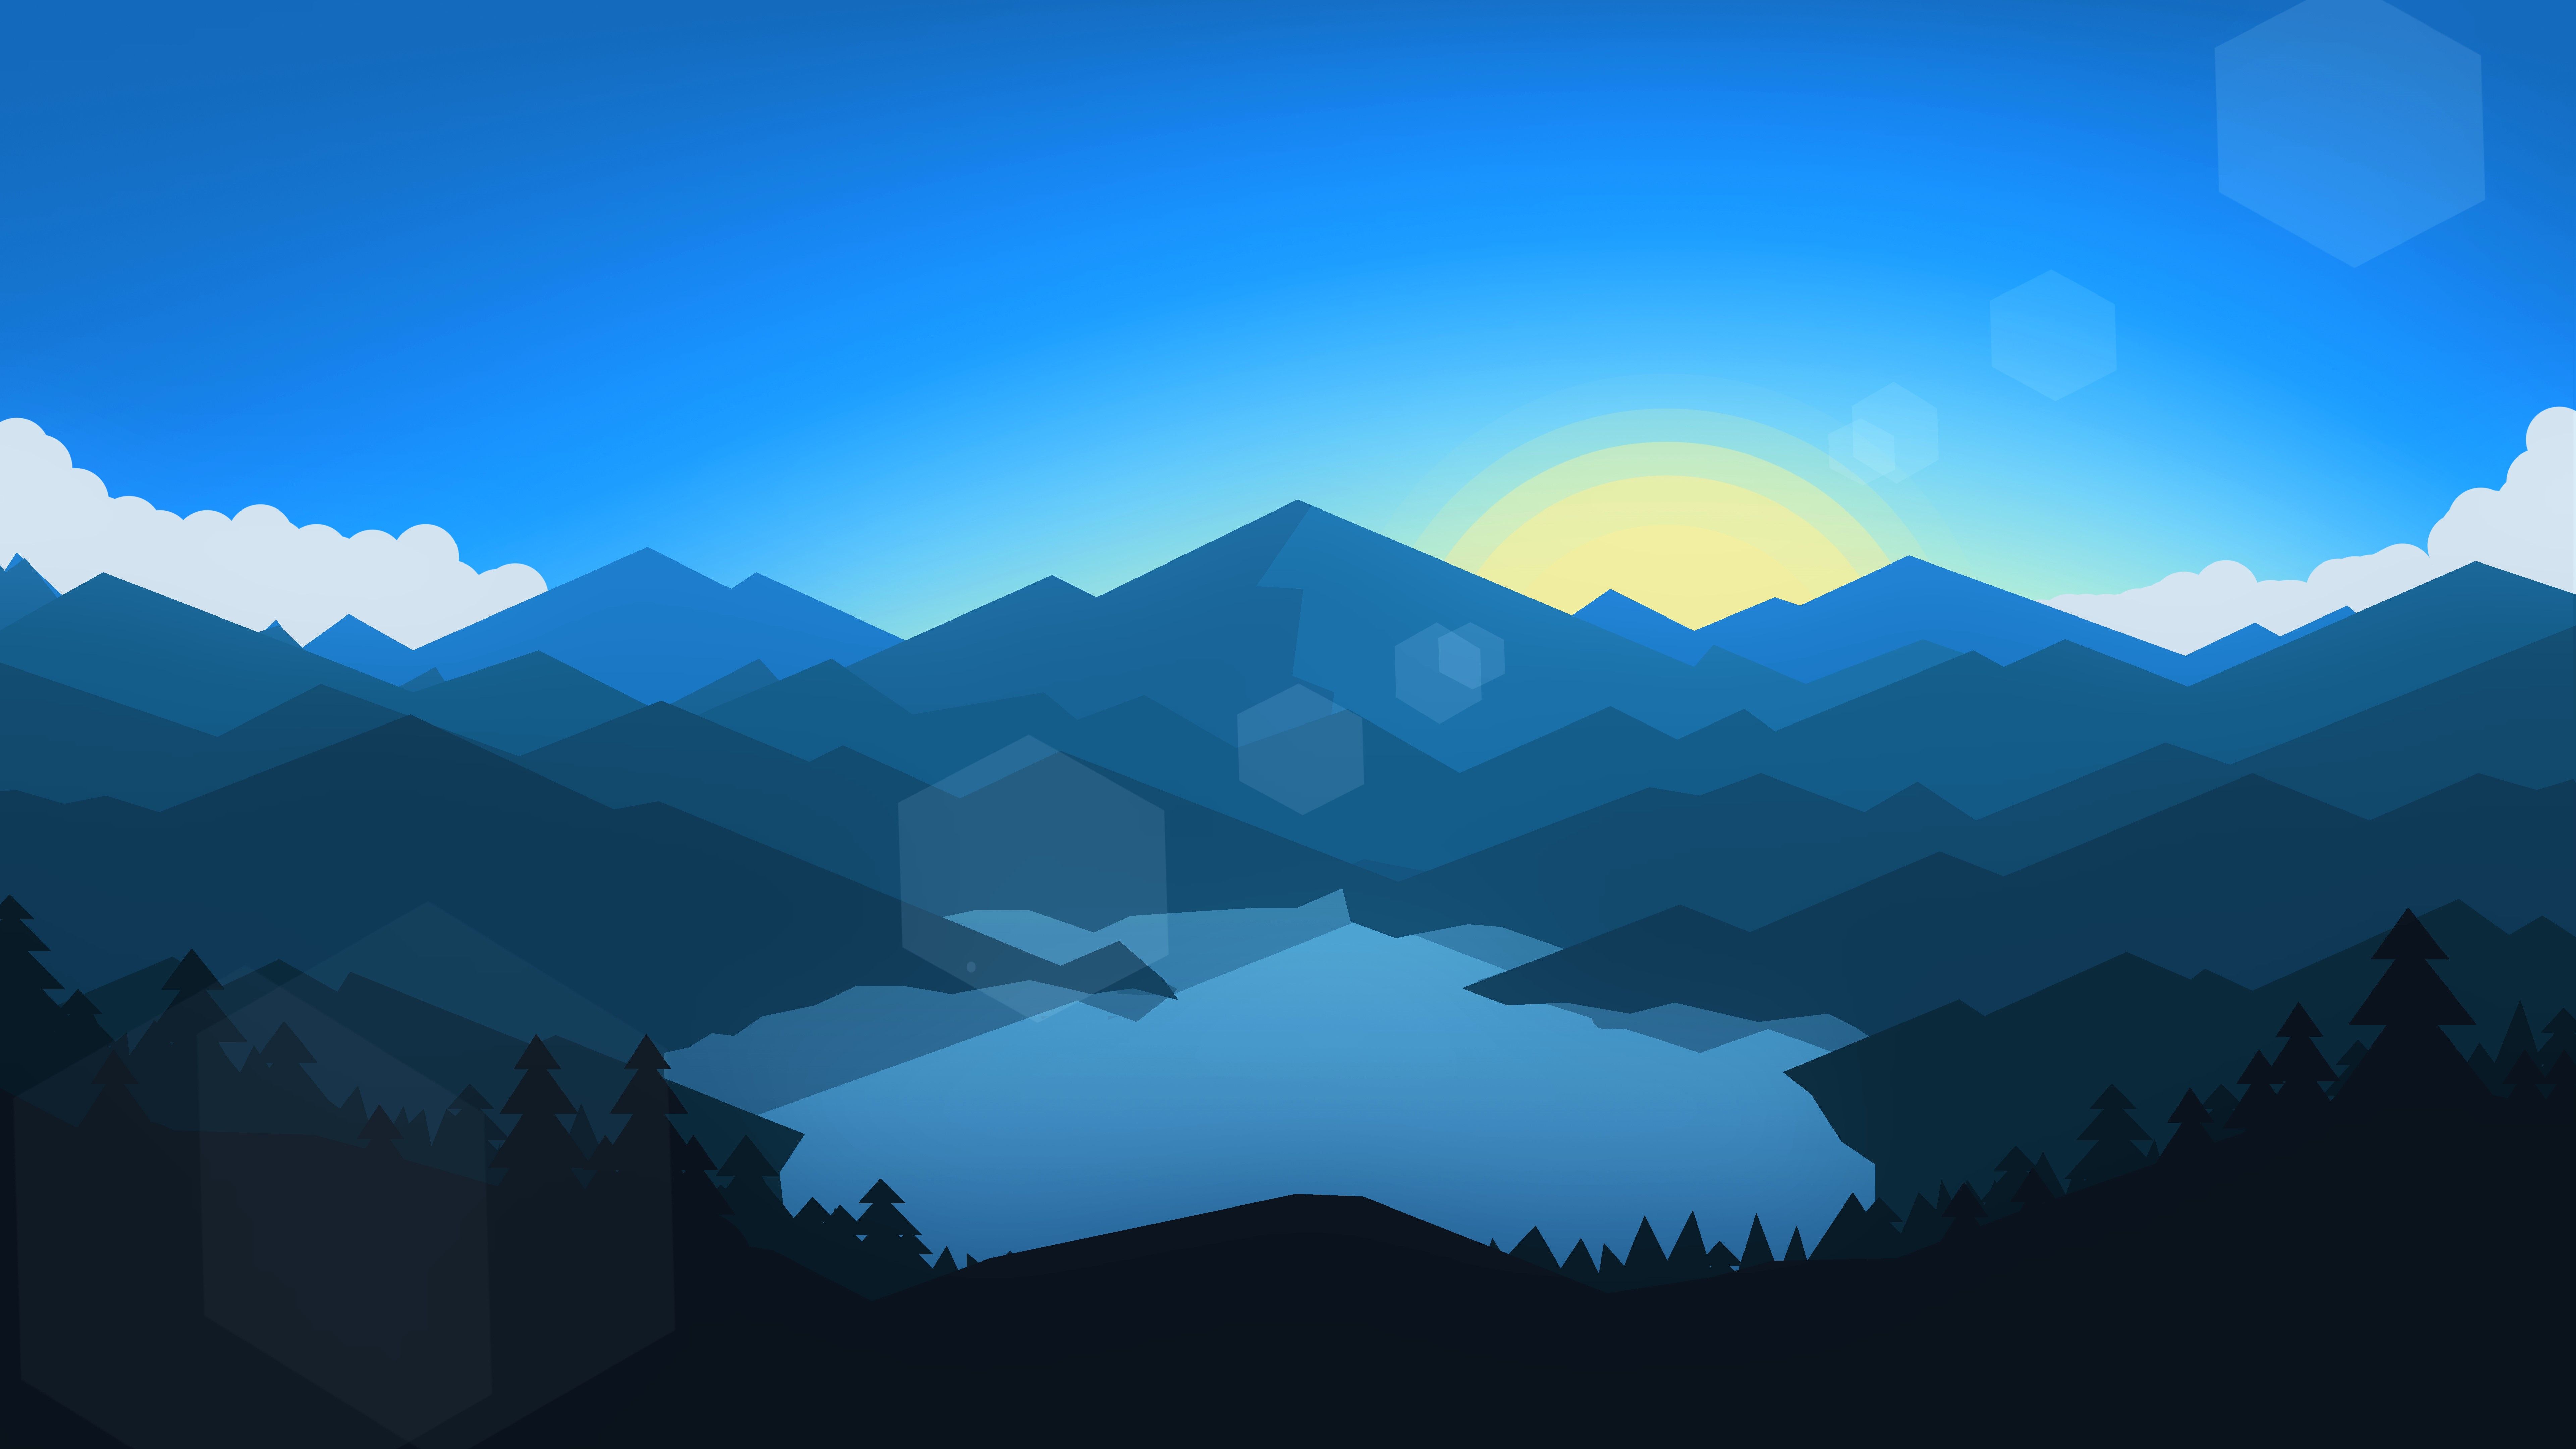 Forest Mountains Sunset Cool Weather Minimalism Wallpaper, HD Minimalist 4K Wallpaper, Image, Photo and Background